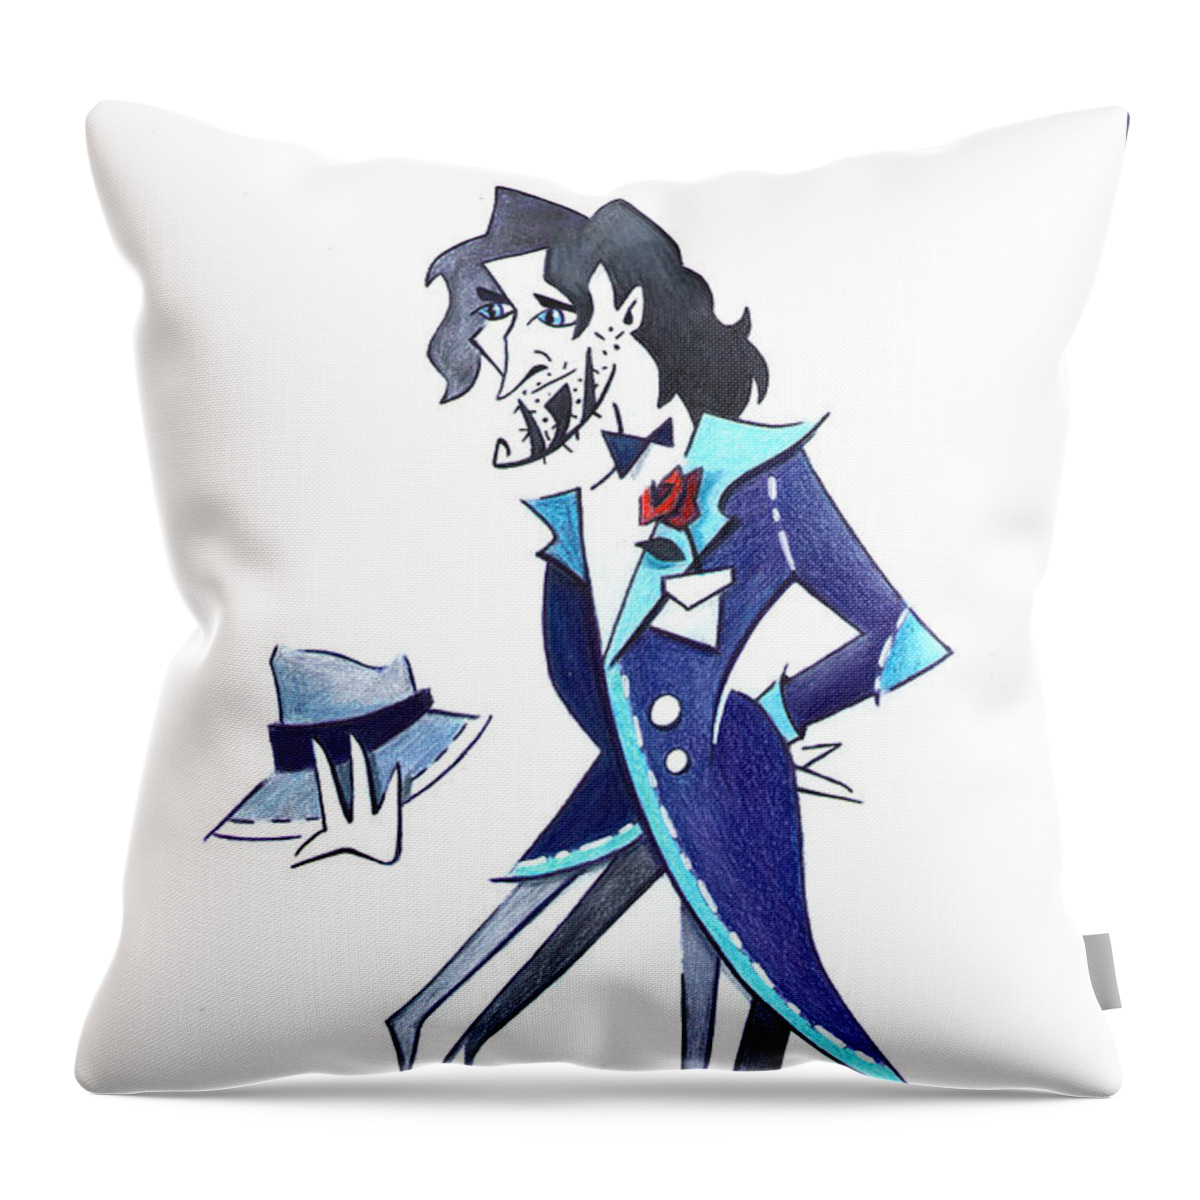 Tango Tradizionale Throw Pillow featuring the drawing Tango Man - Drawing Illustration by Arte Venezia